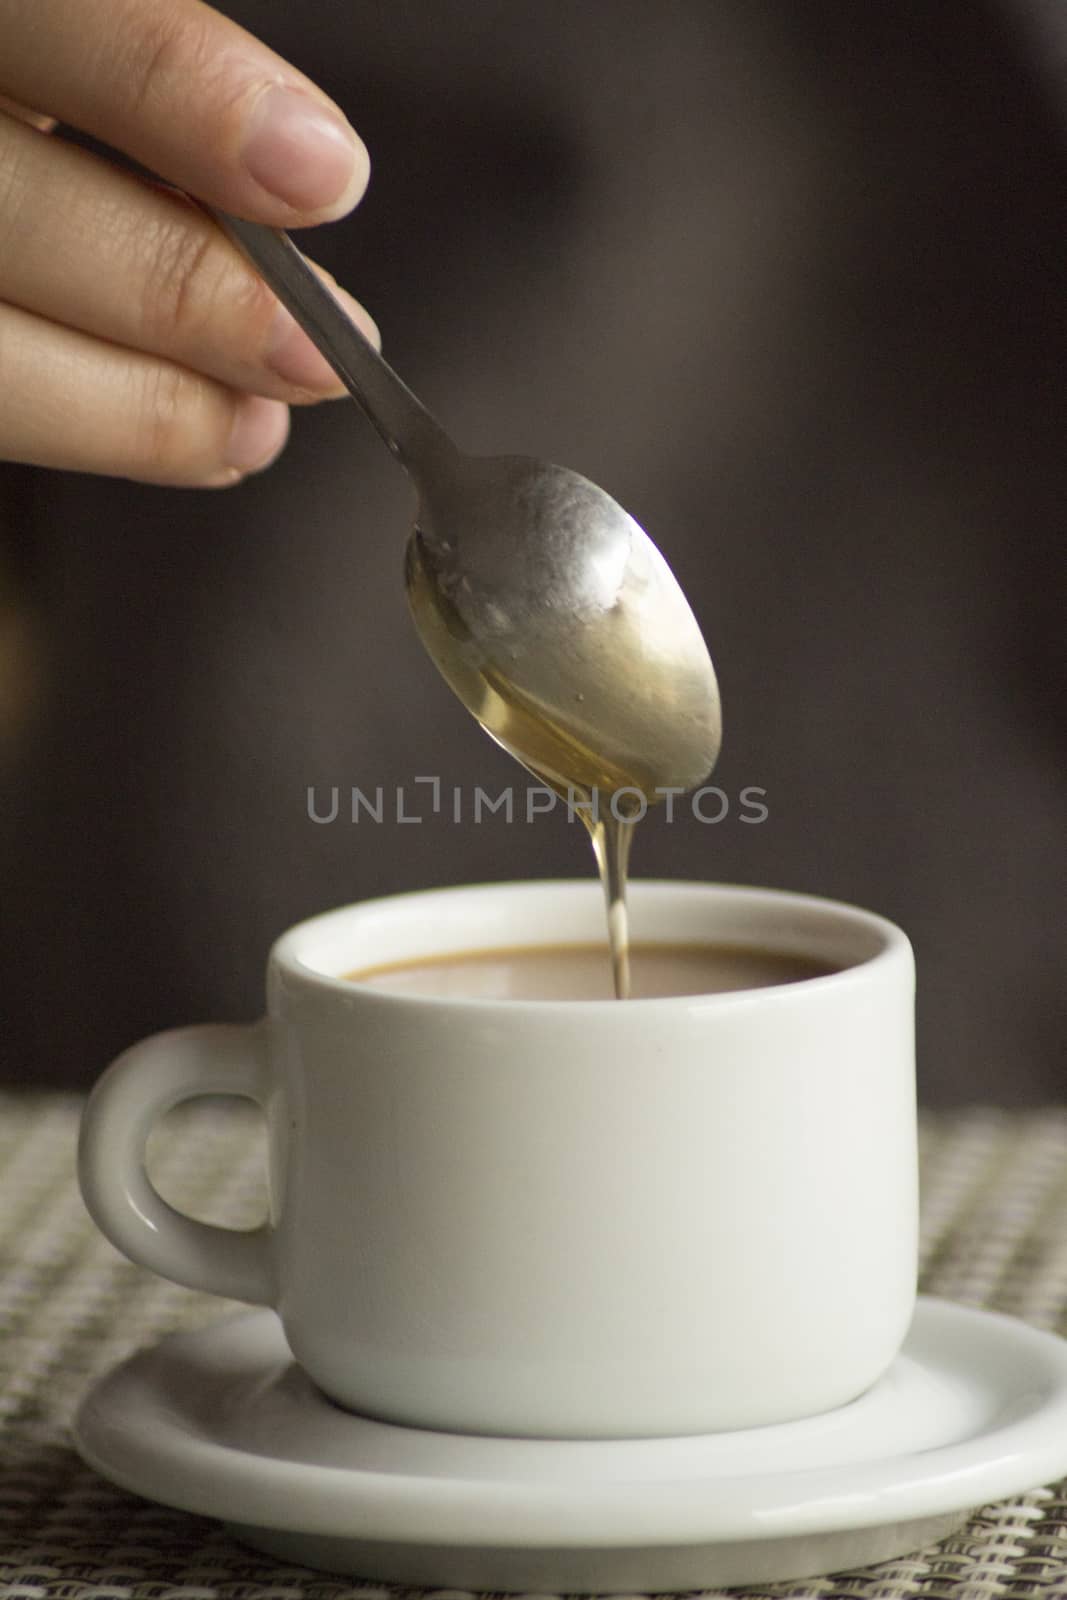 Hand of young woman ading corn syrup with spoon in cup of coffee expresso with milk on saucer in table.